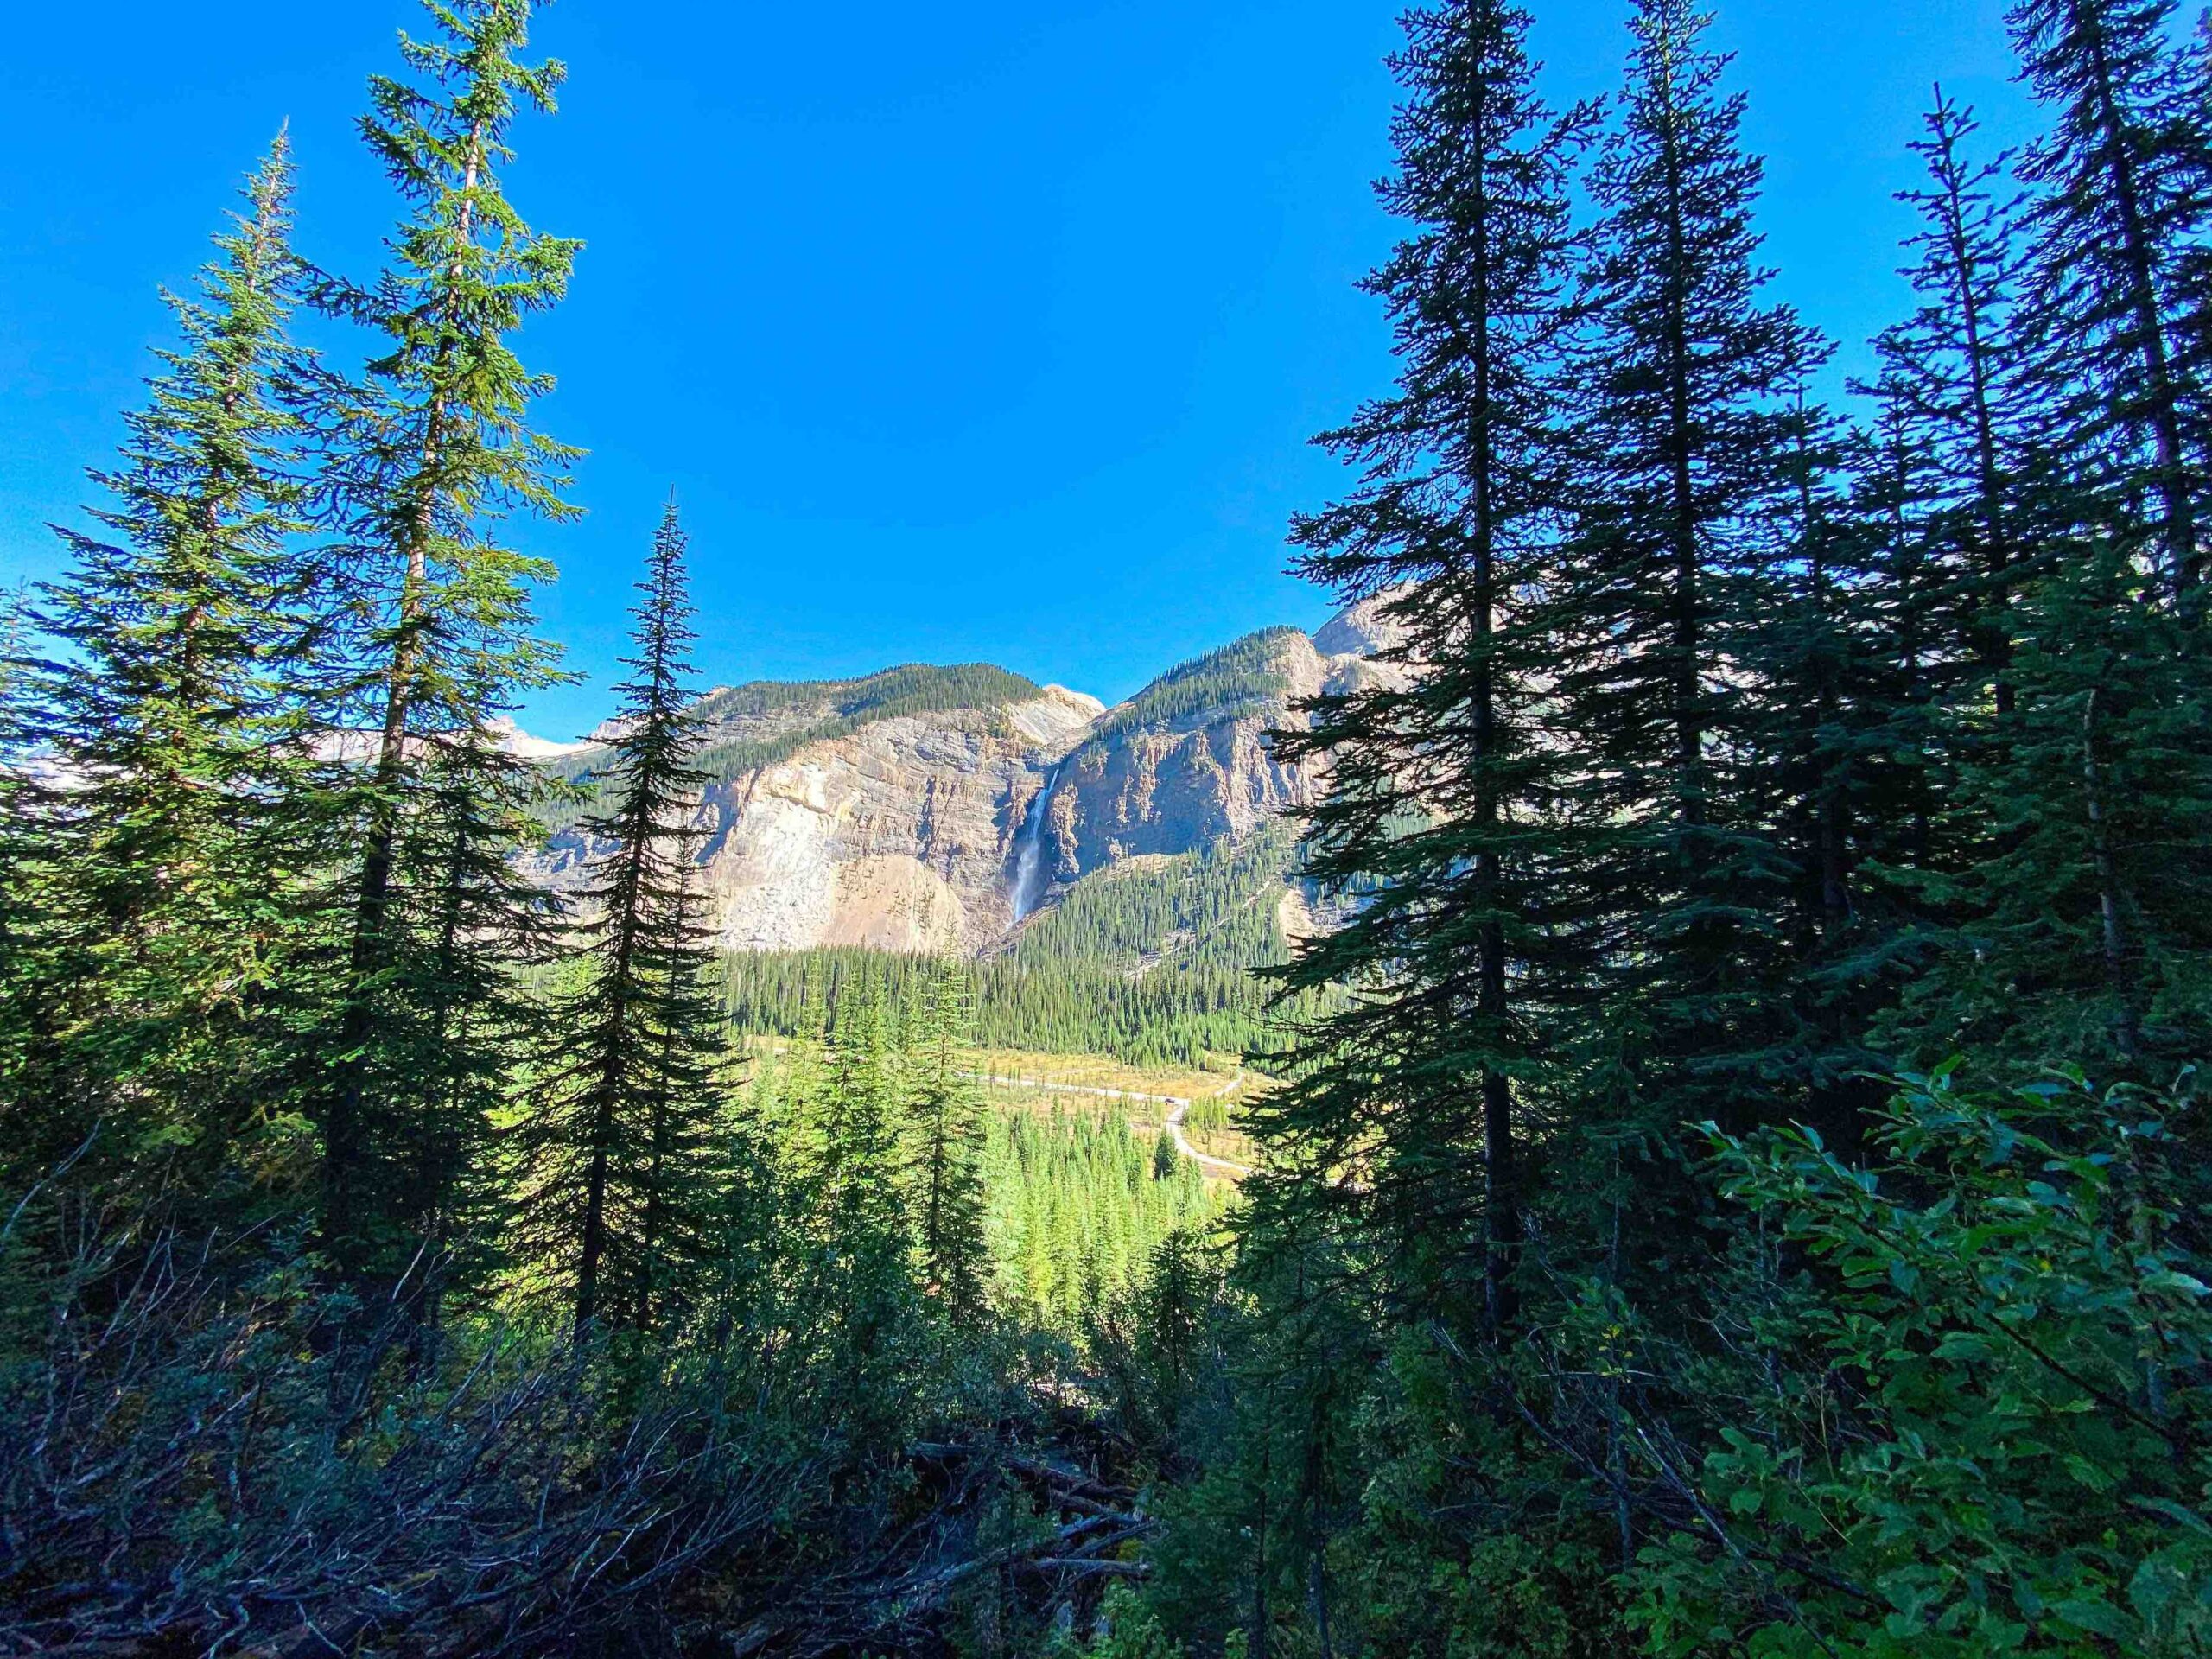 View from the switchbacks of the Takakkaw Falls